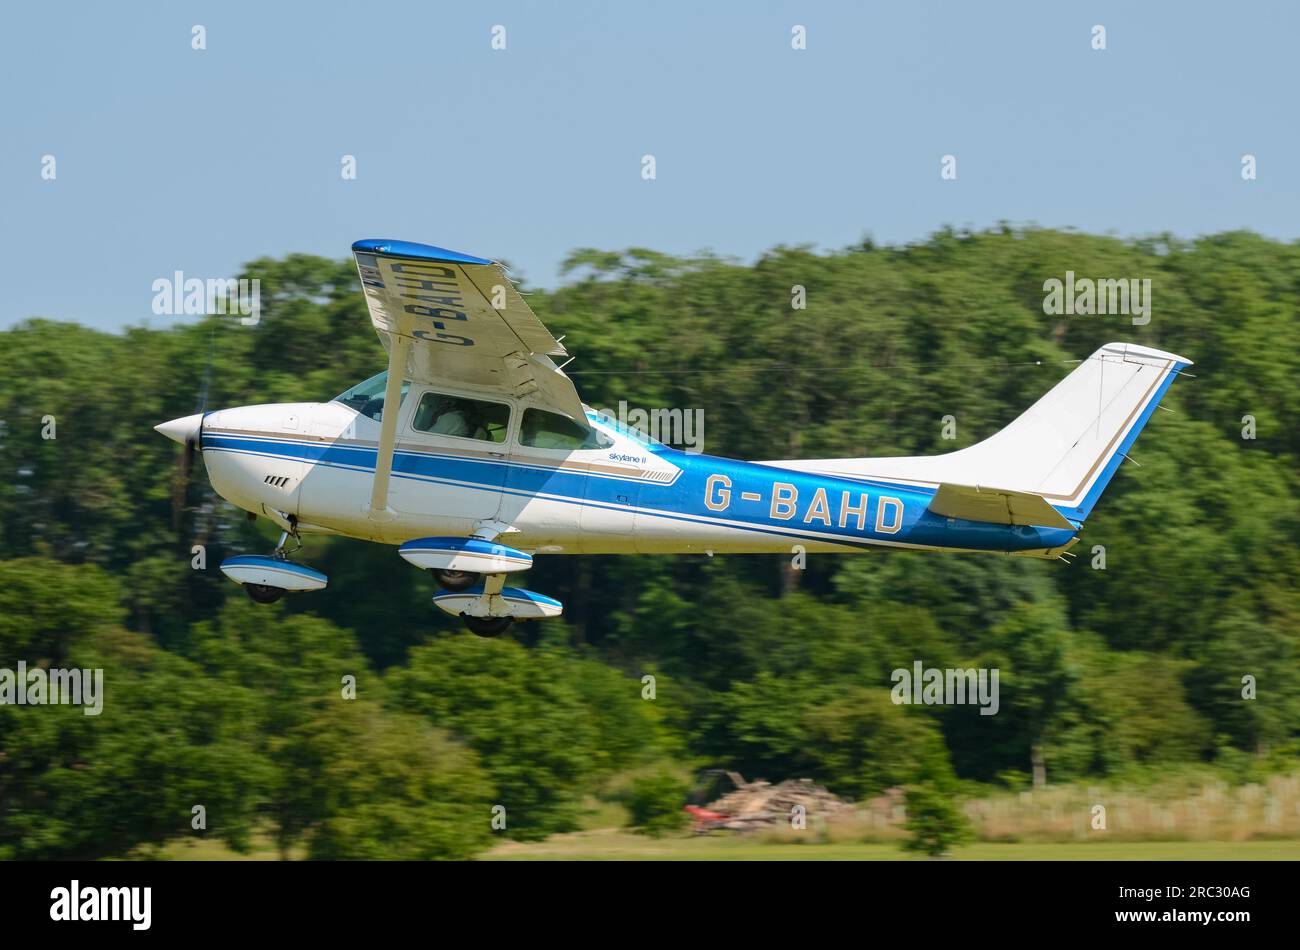 Cessna 182P Skylane plane taking off at Heveningham countryside grass airstrip in Suffolk, UK after fly-in event. Tree lined grass runway. Stock Photo